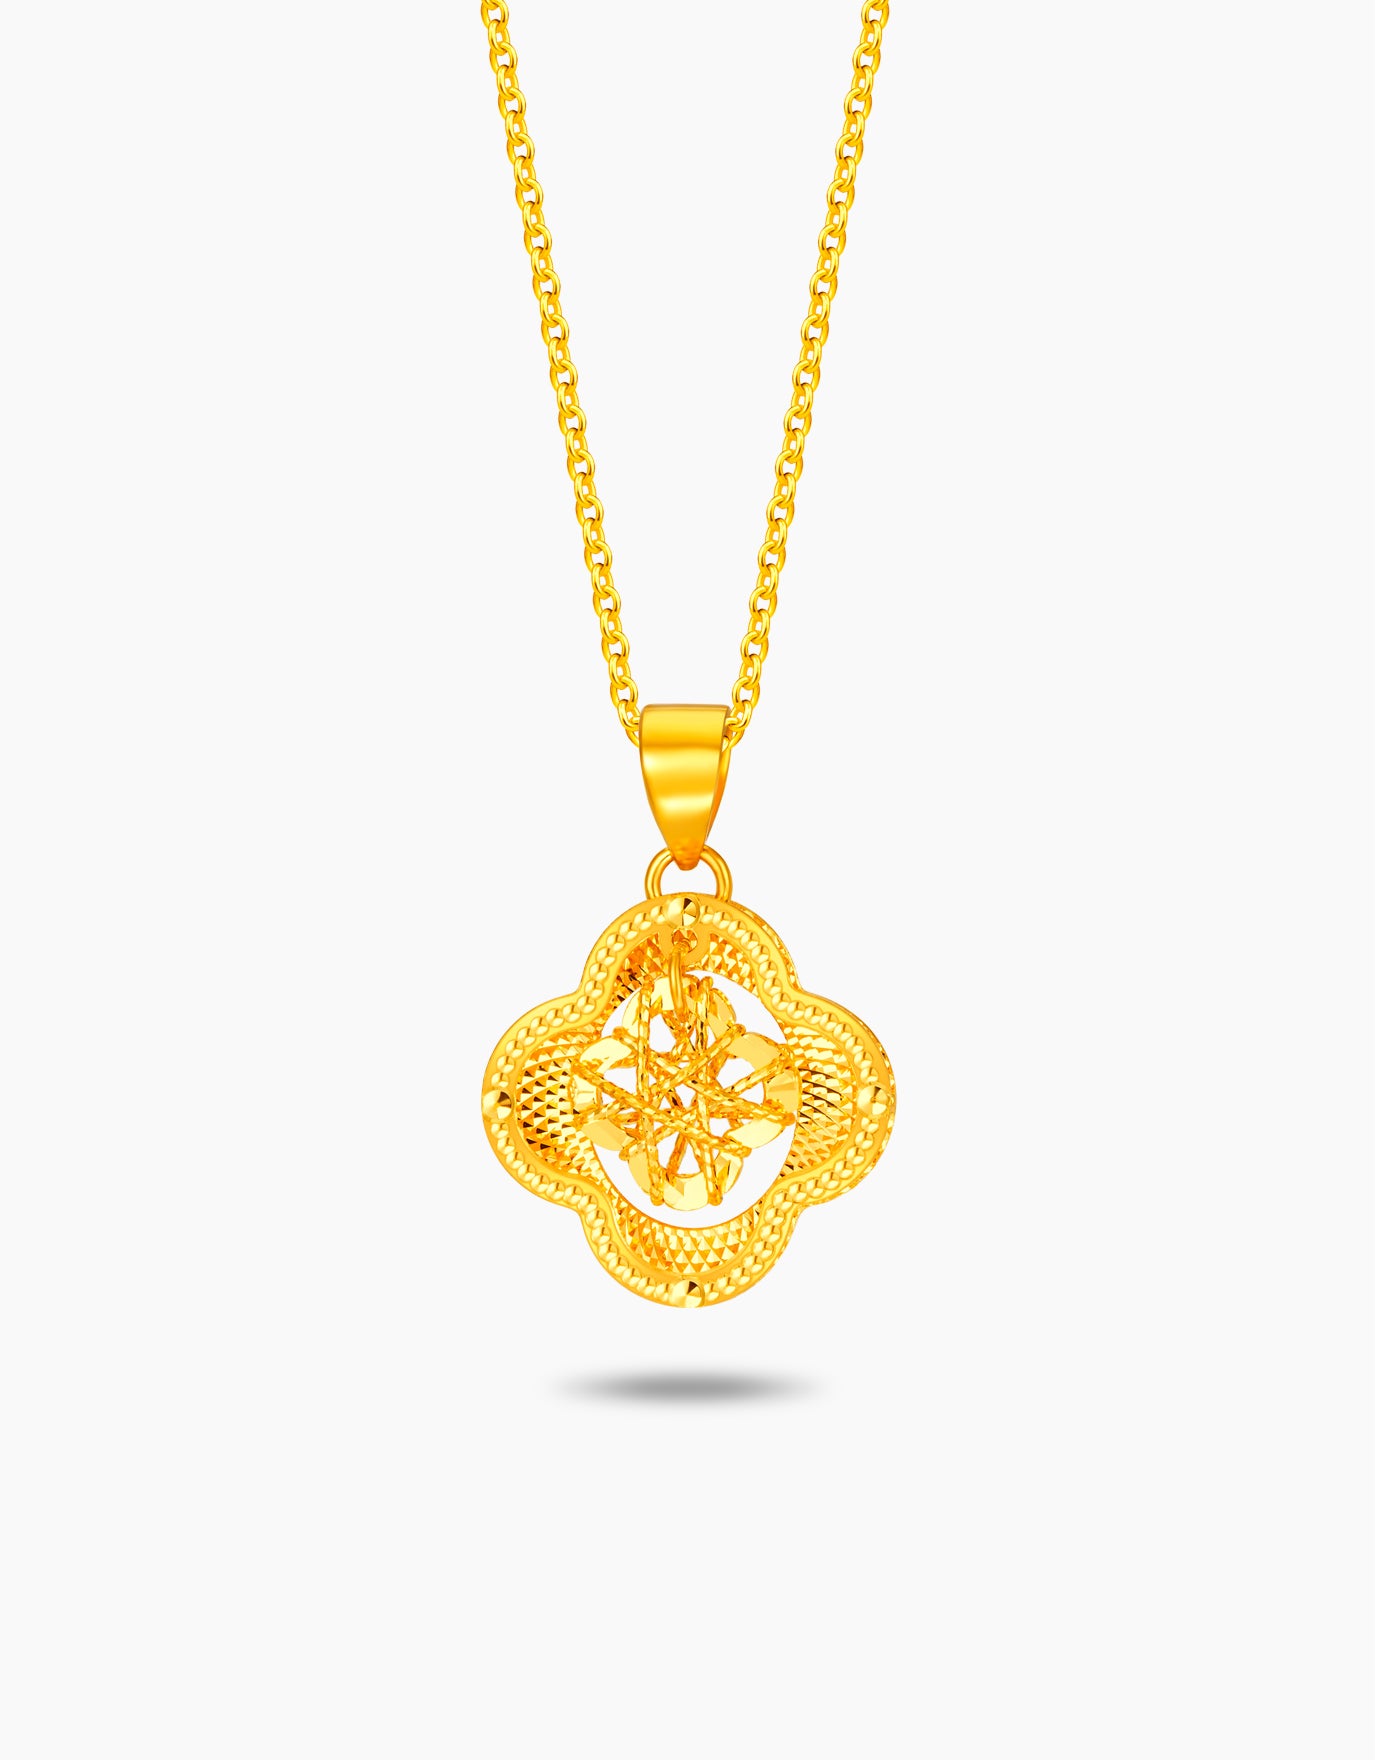 LVC 9IN Glowing Clover 999 Gold Pendant